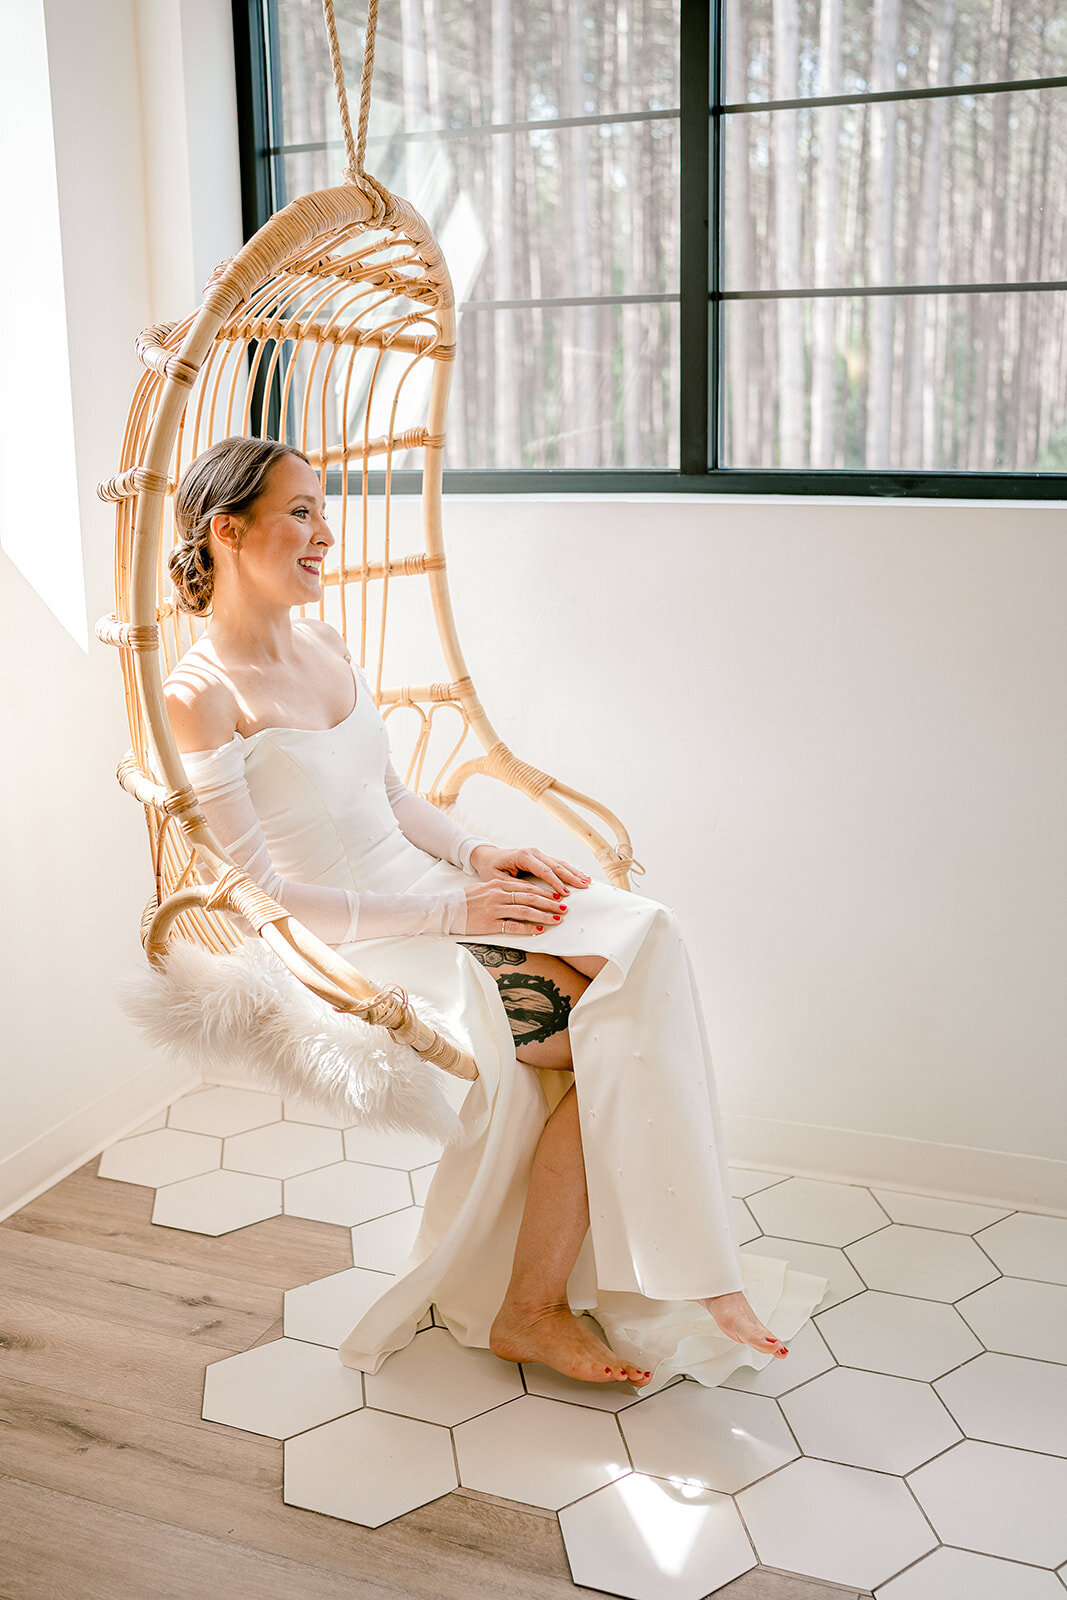 A bride relaxes in a chair at the bridal suite at Pinewood Weddings and events venue